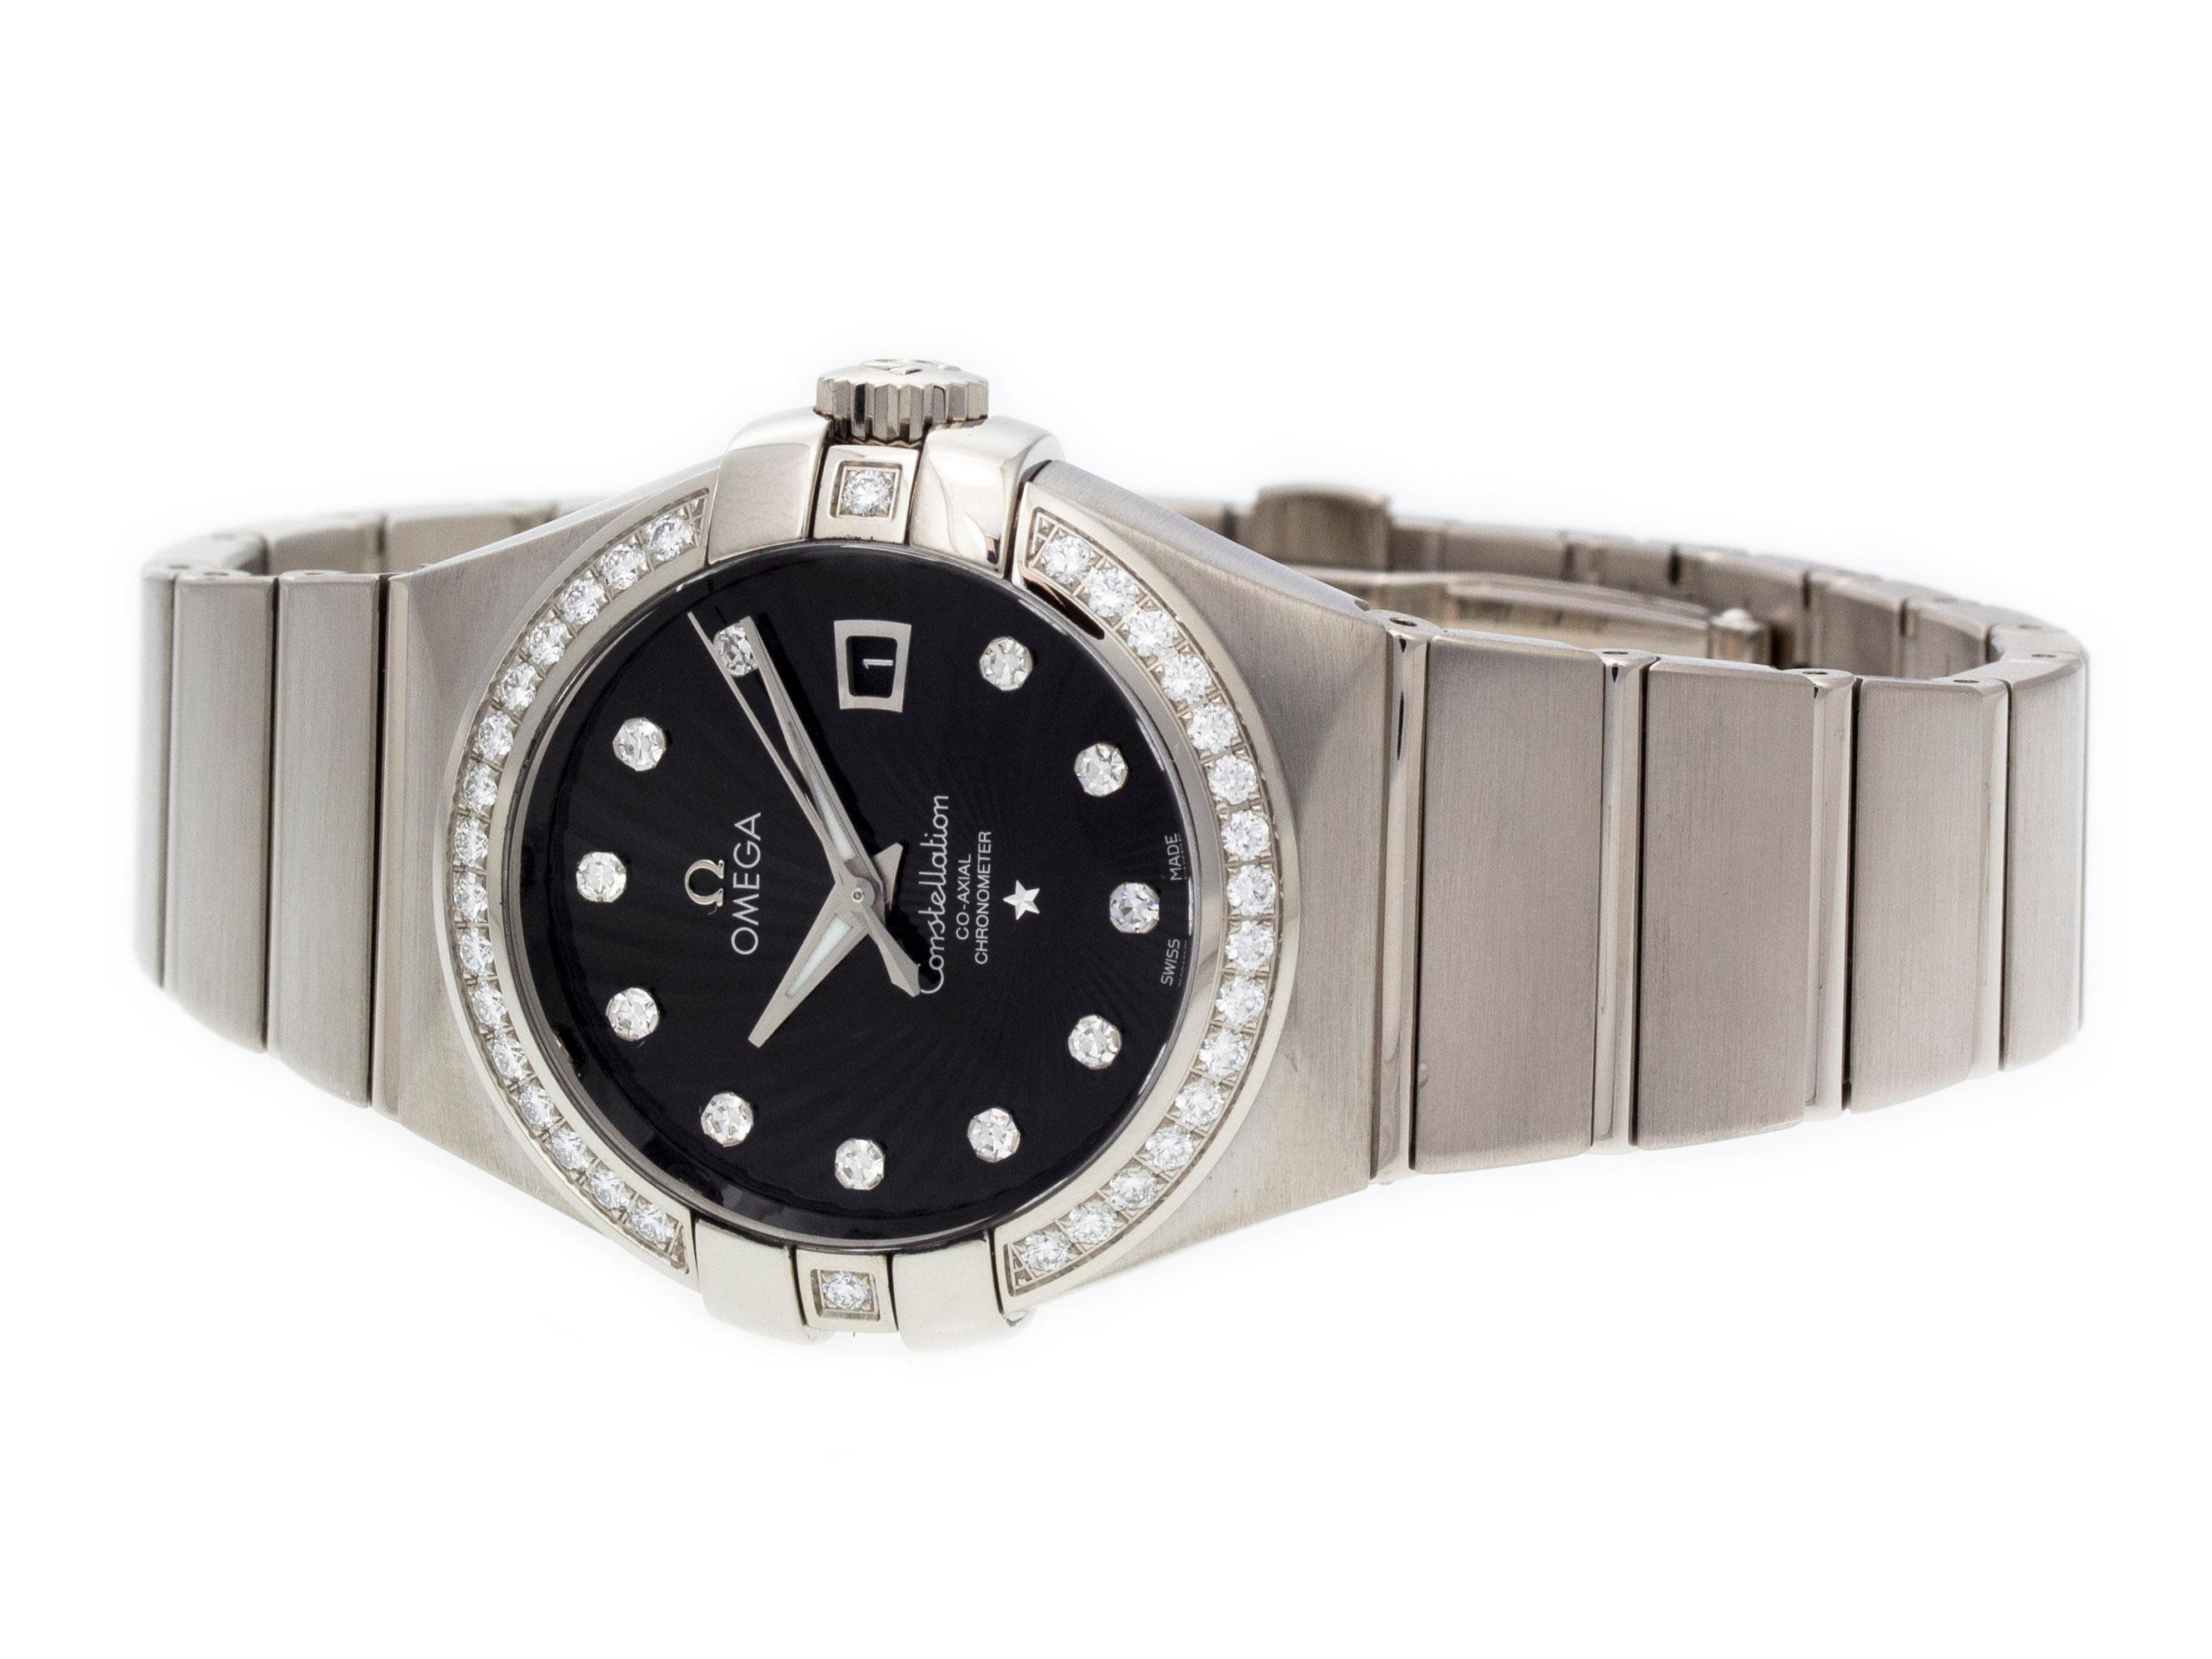 Omega Constellation 123.55.31.20.51.001 For Sale 2